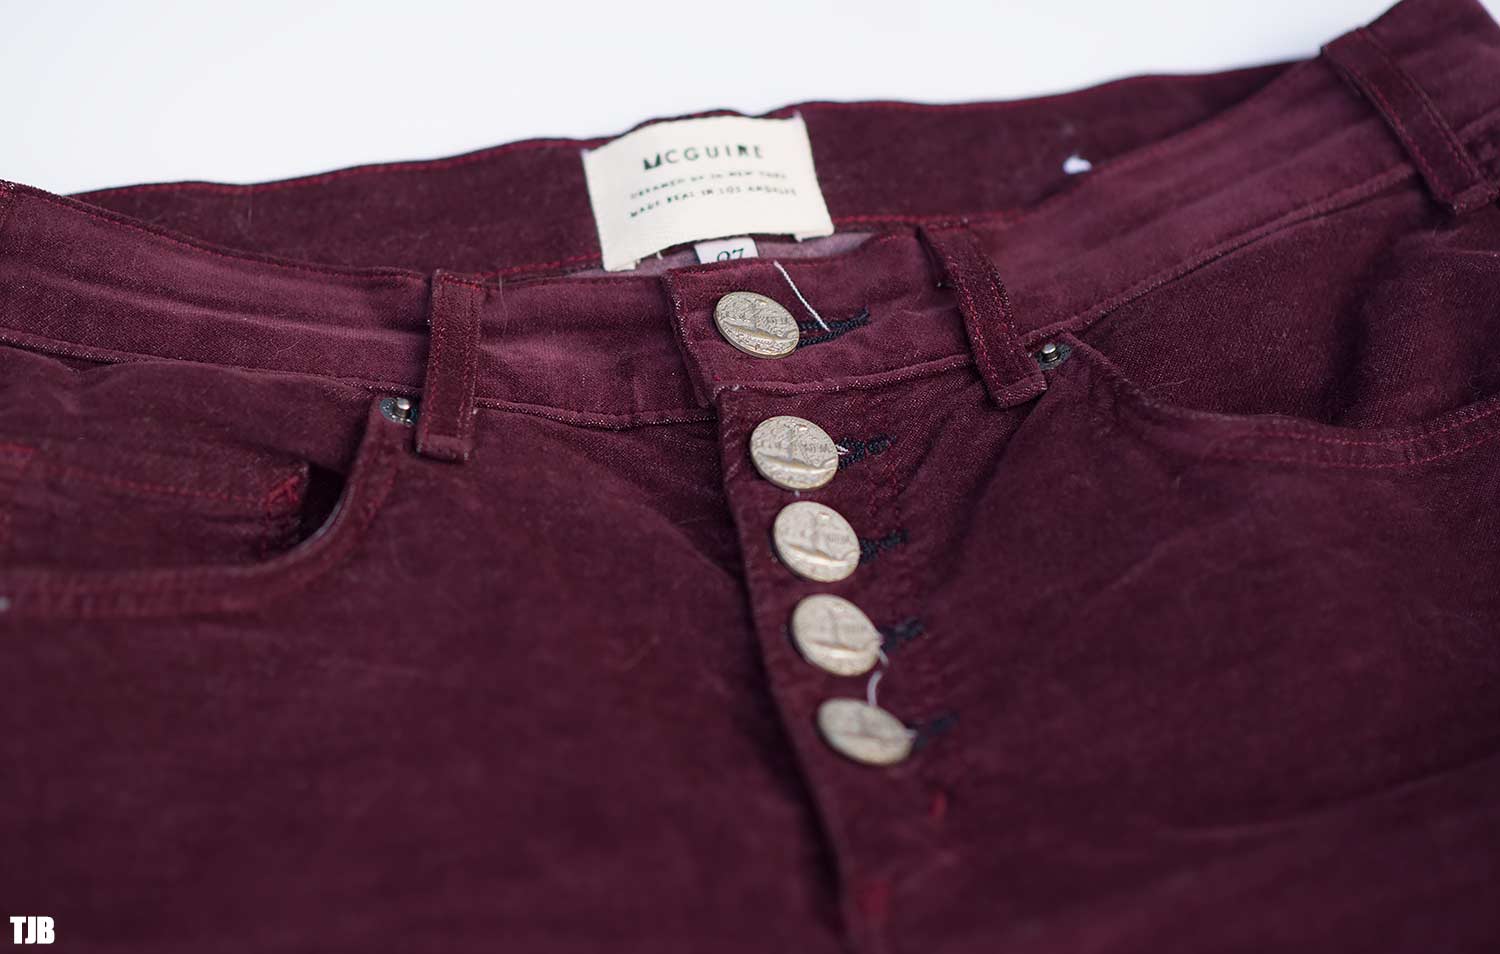 mcguire-denim-newton-exposed-button-skinny-pants-in-pinot-review-2